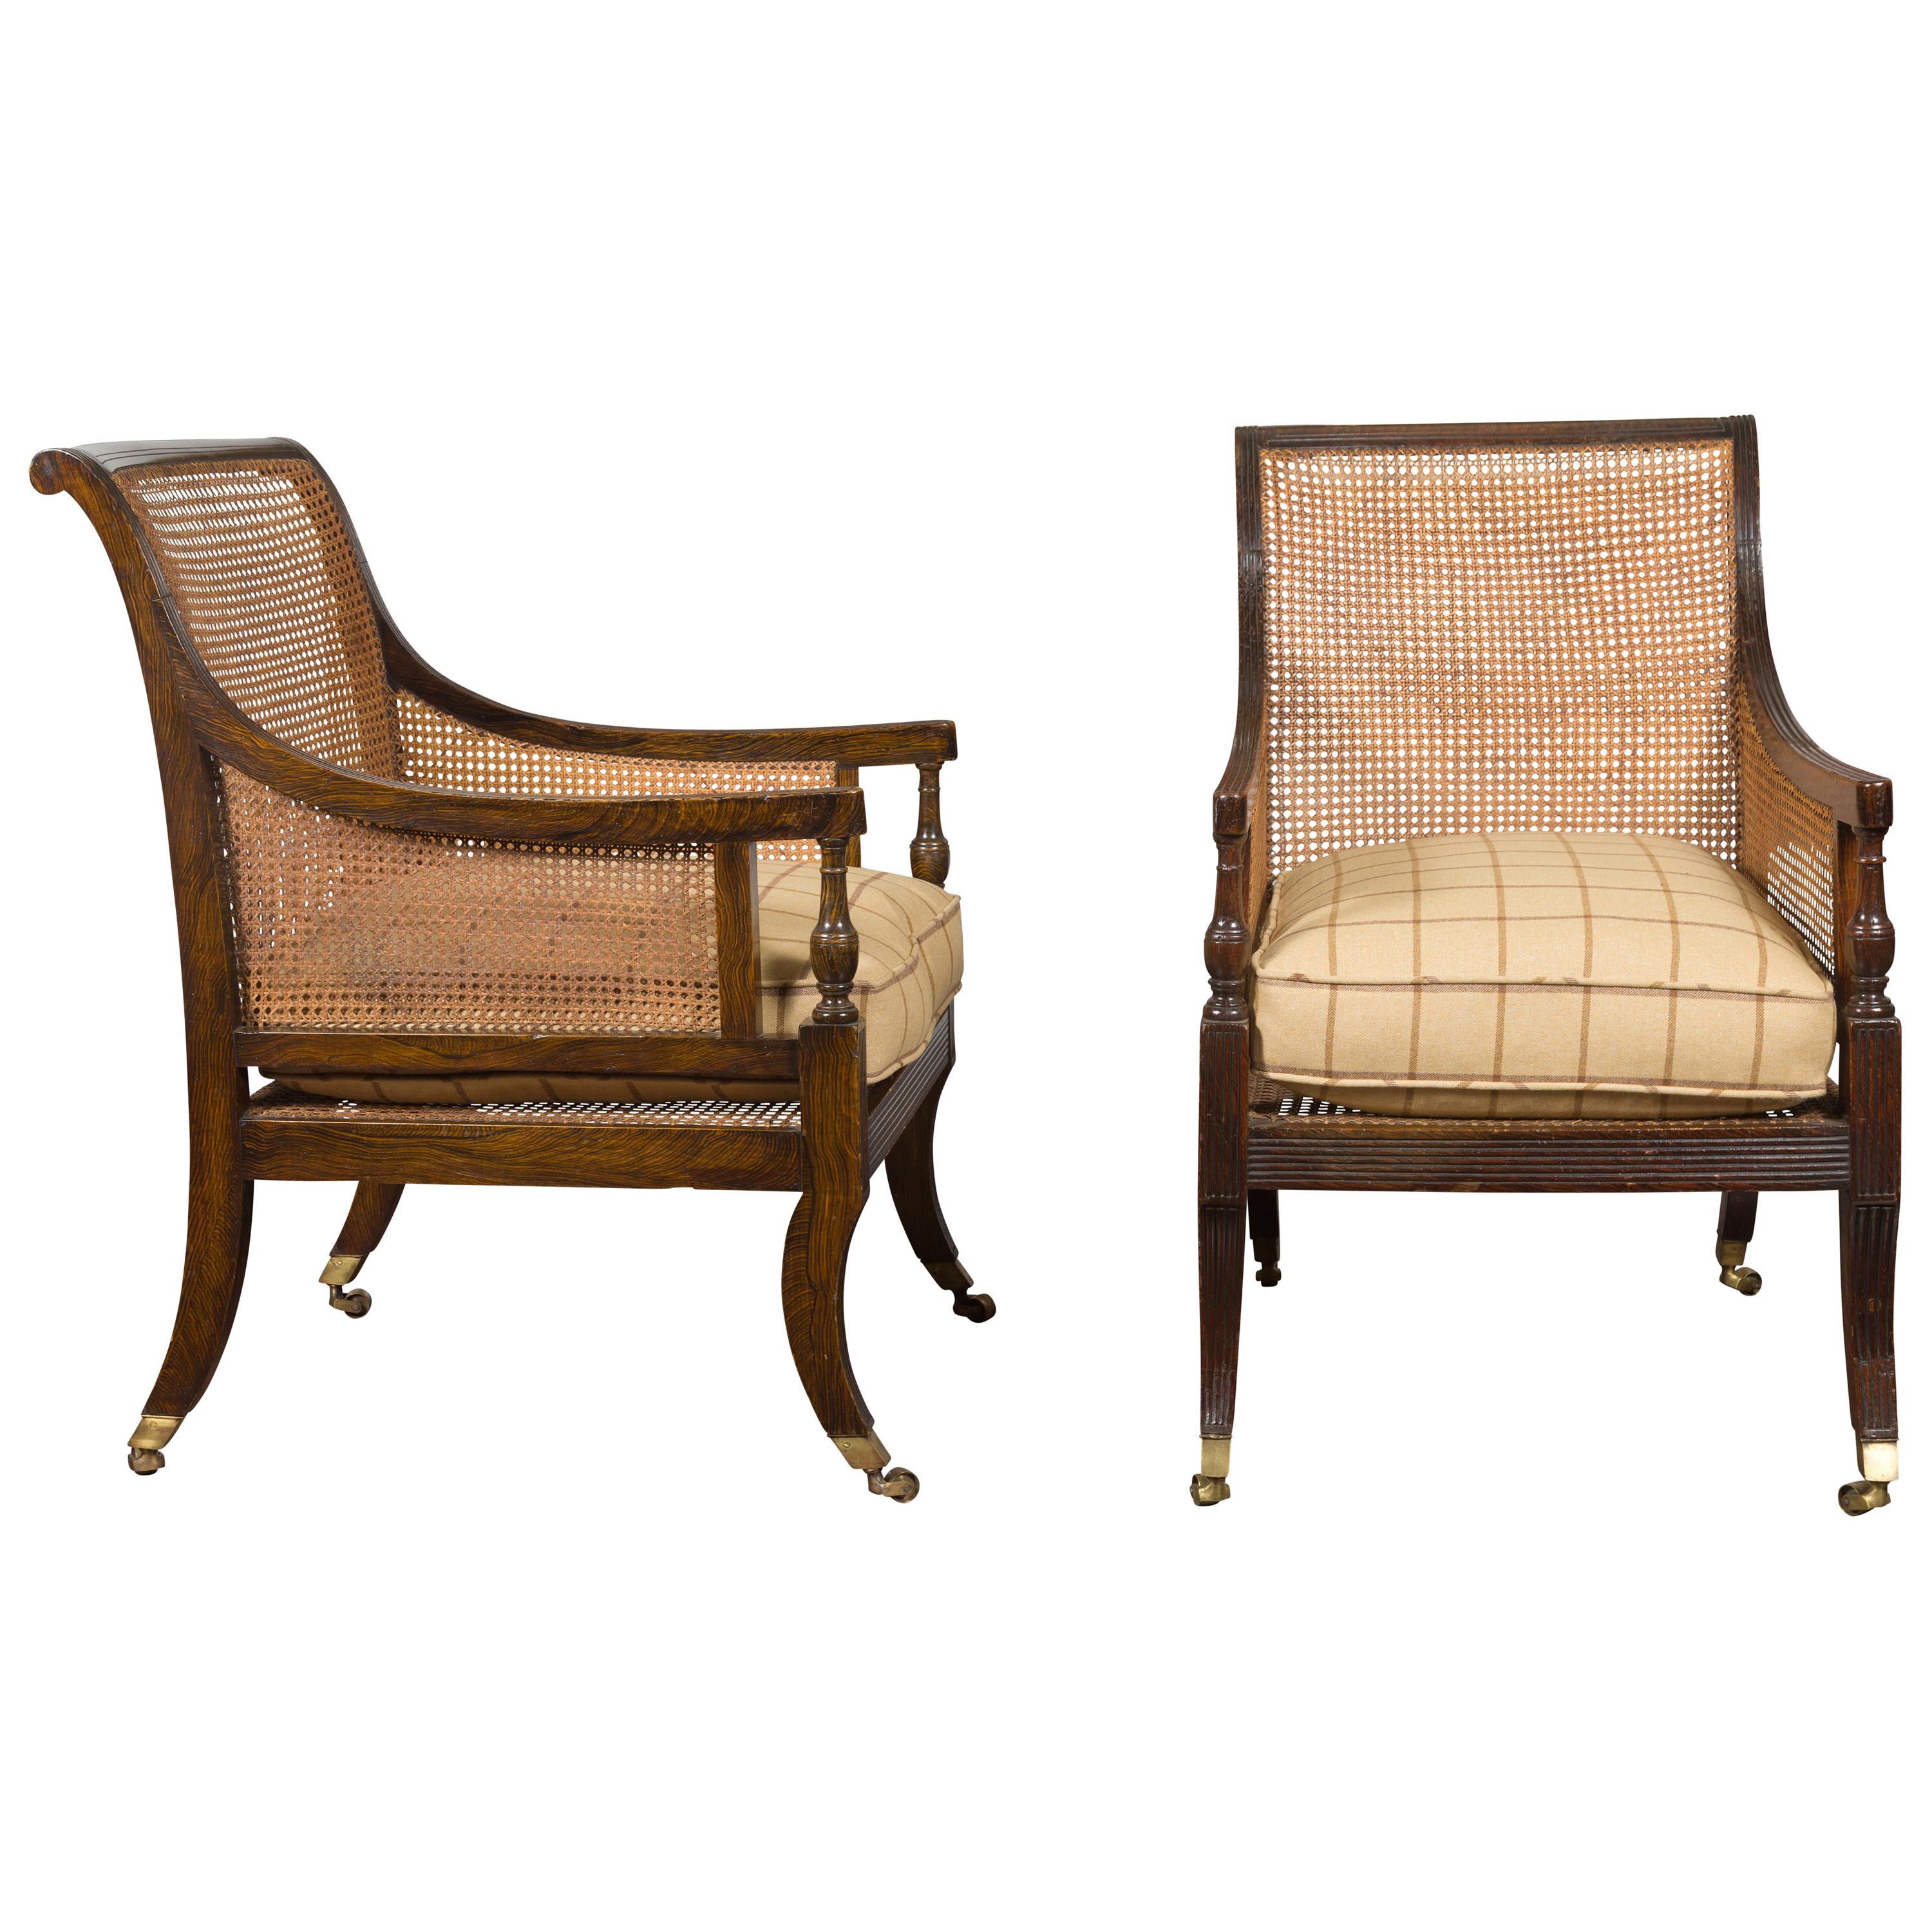 Pair of English 1870s Cane and Oak Library Chairs with Cushions and Casters